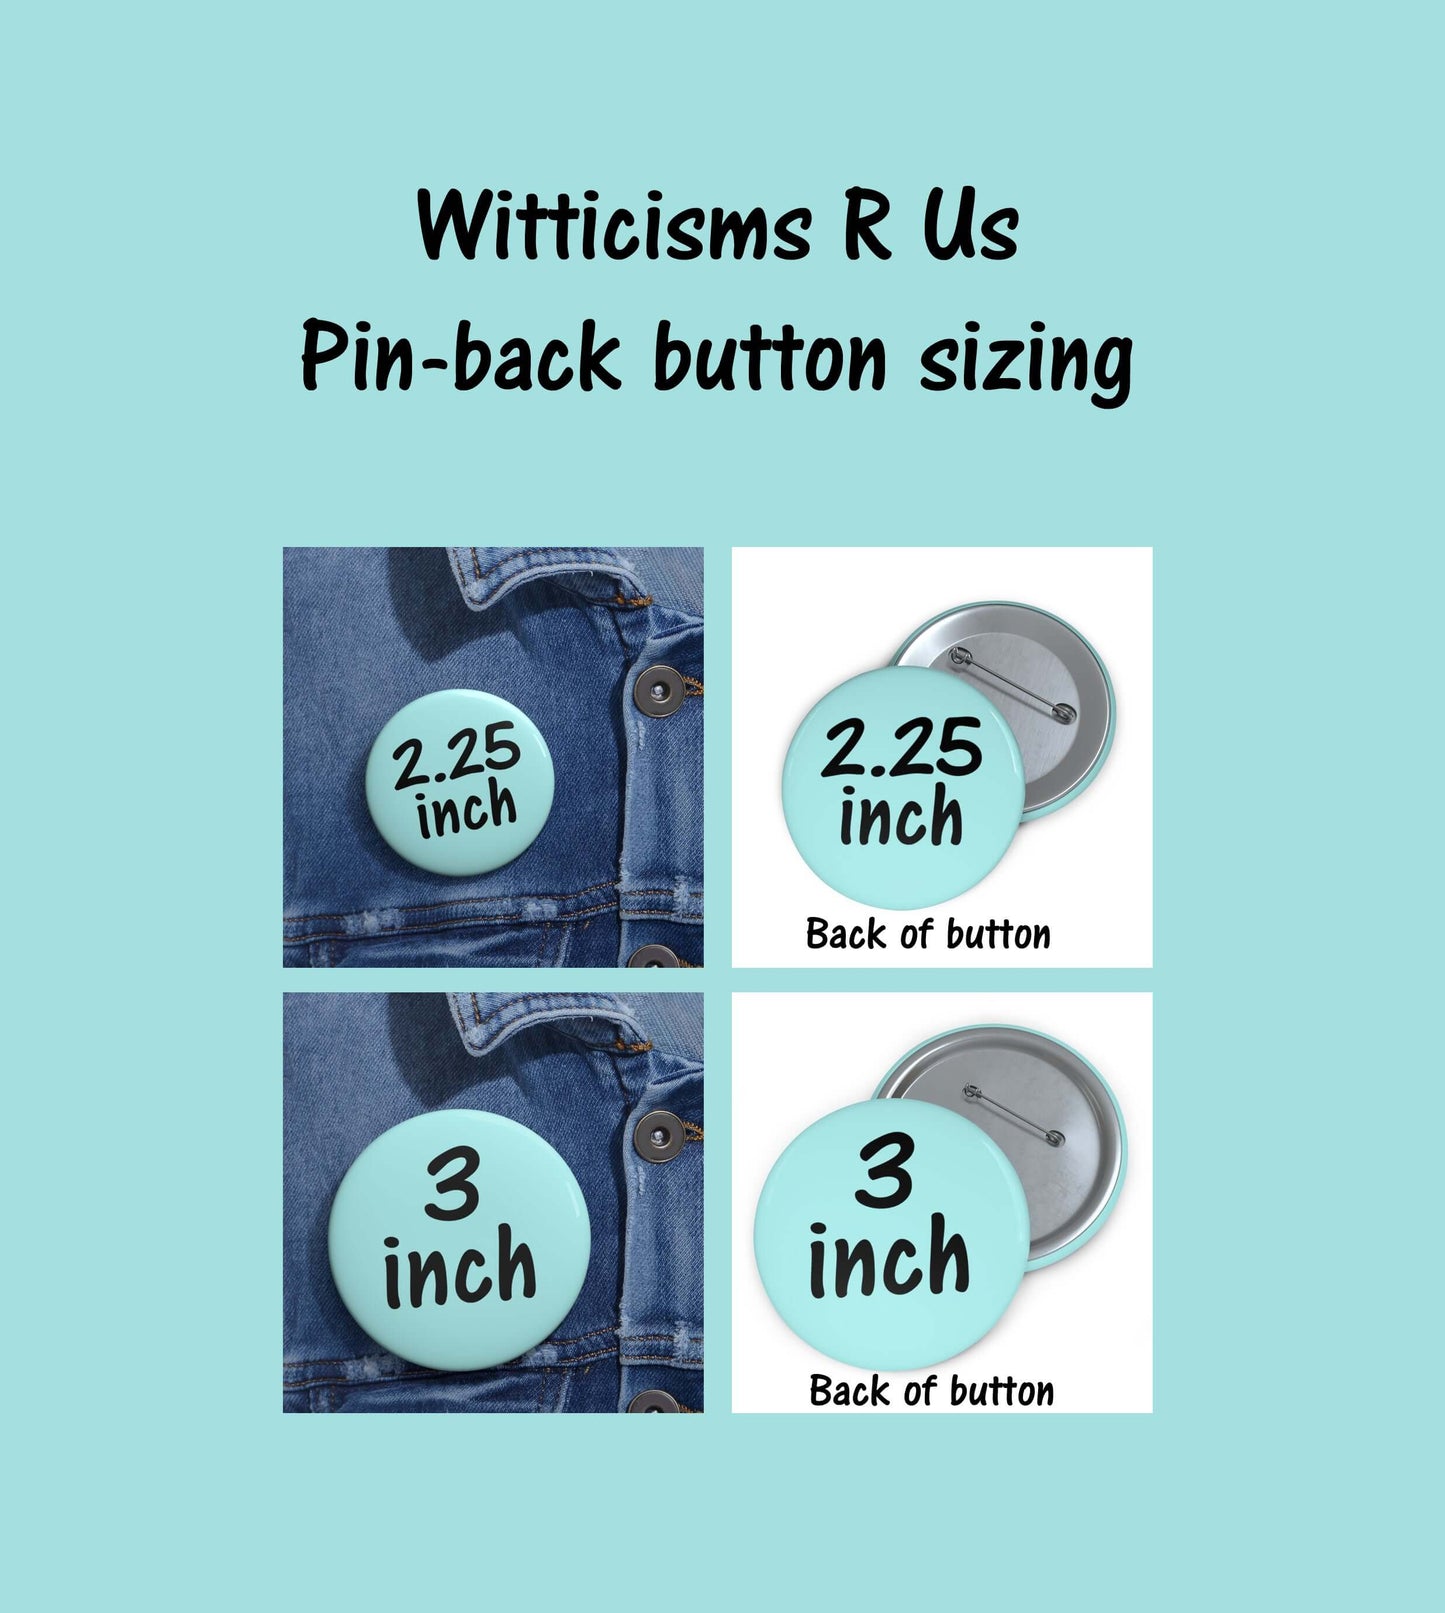 My boyfriends wife hates me pin-back button